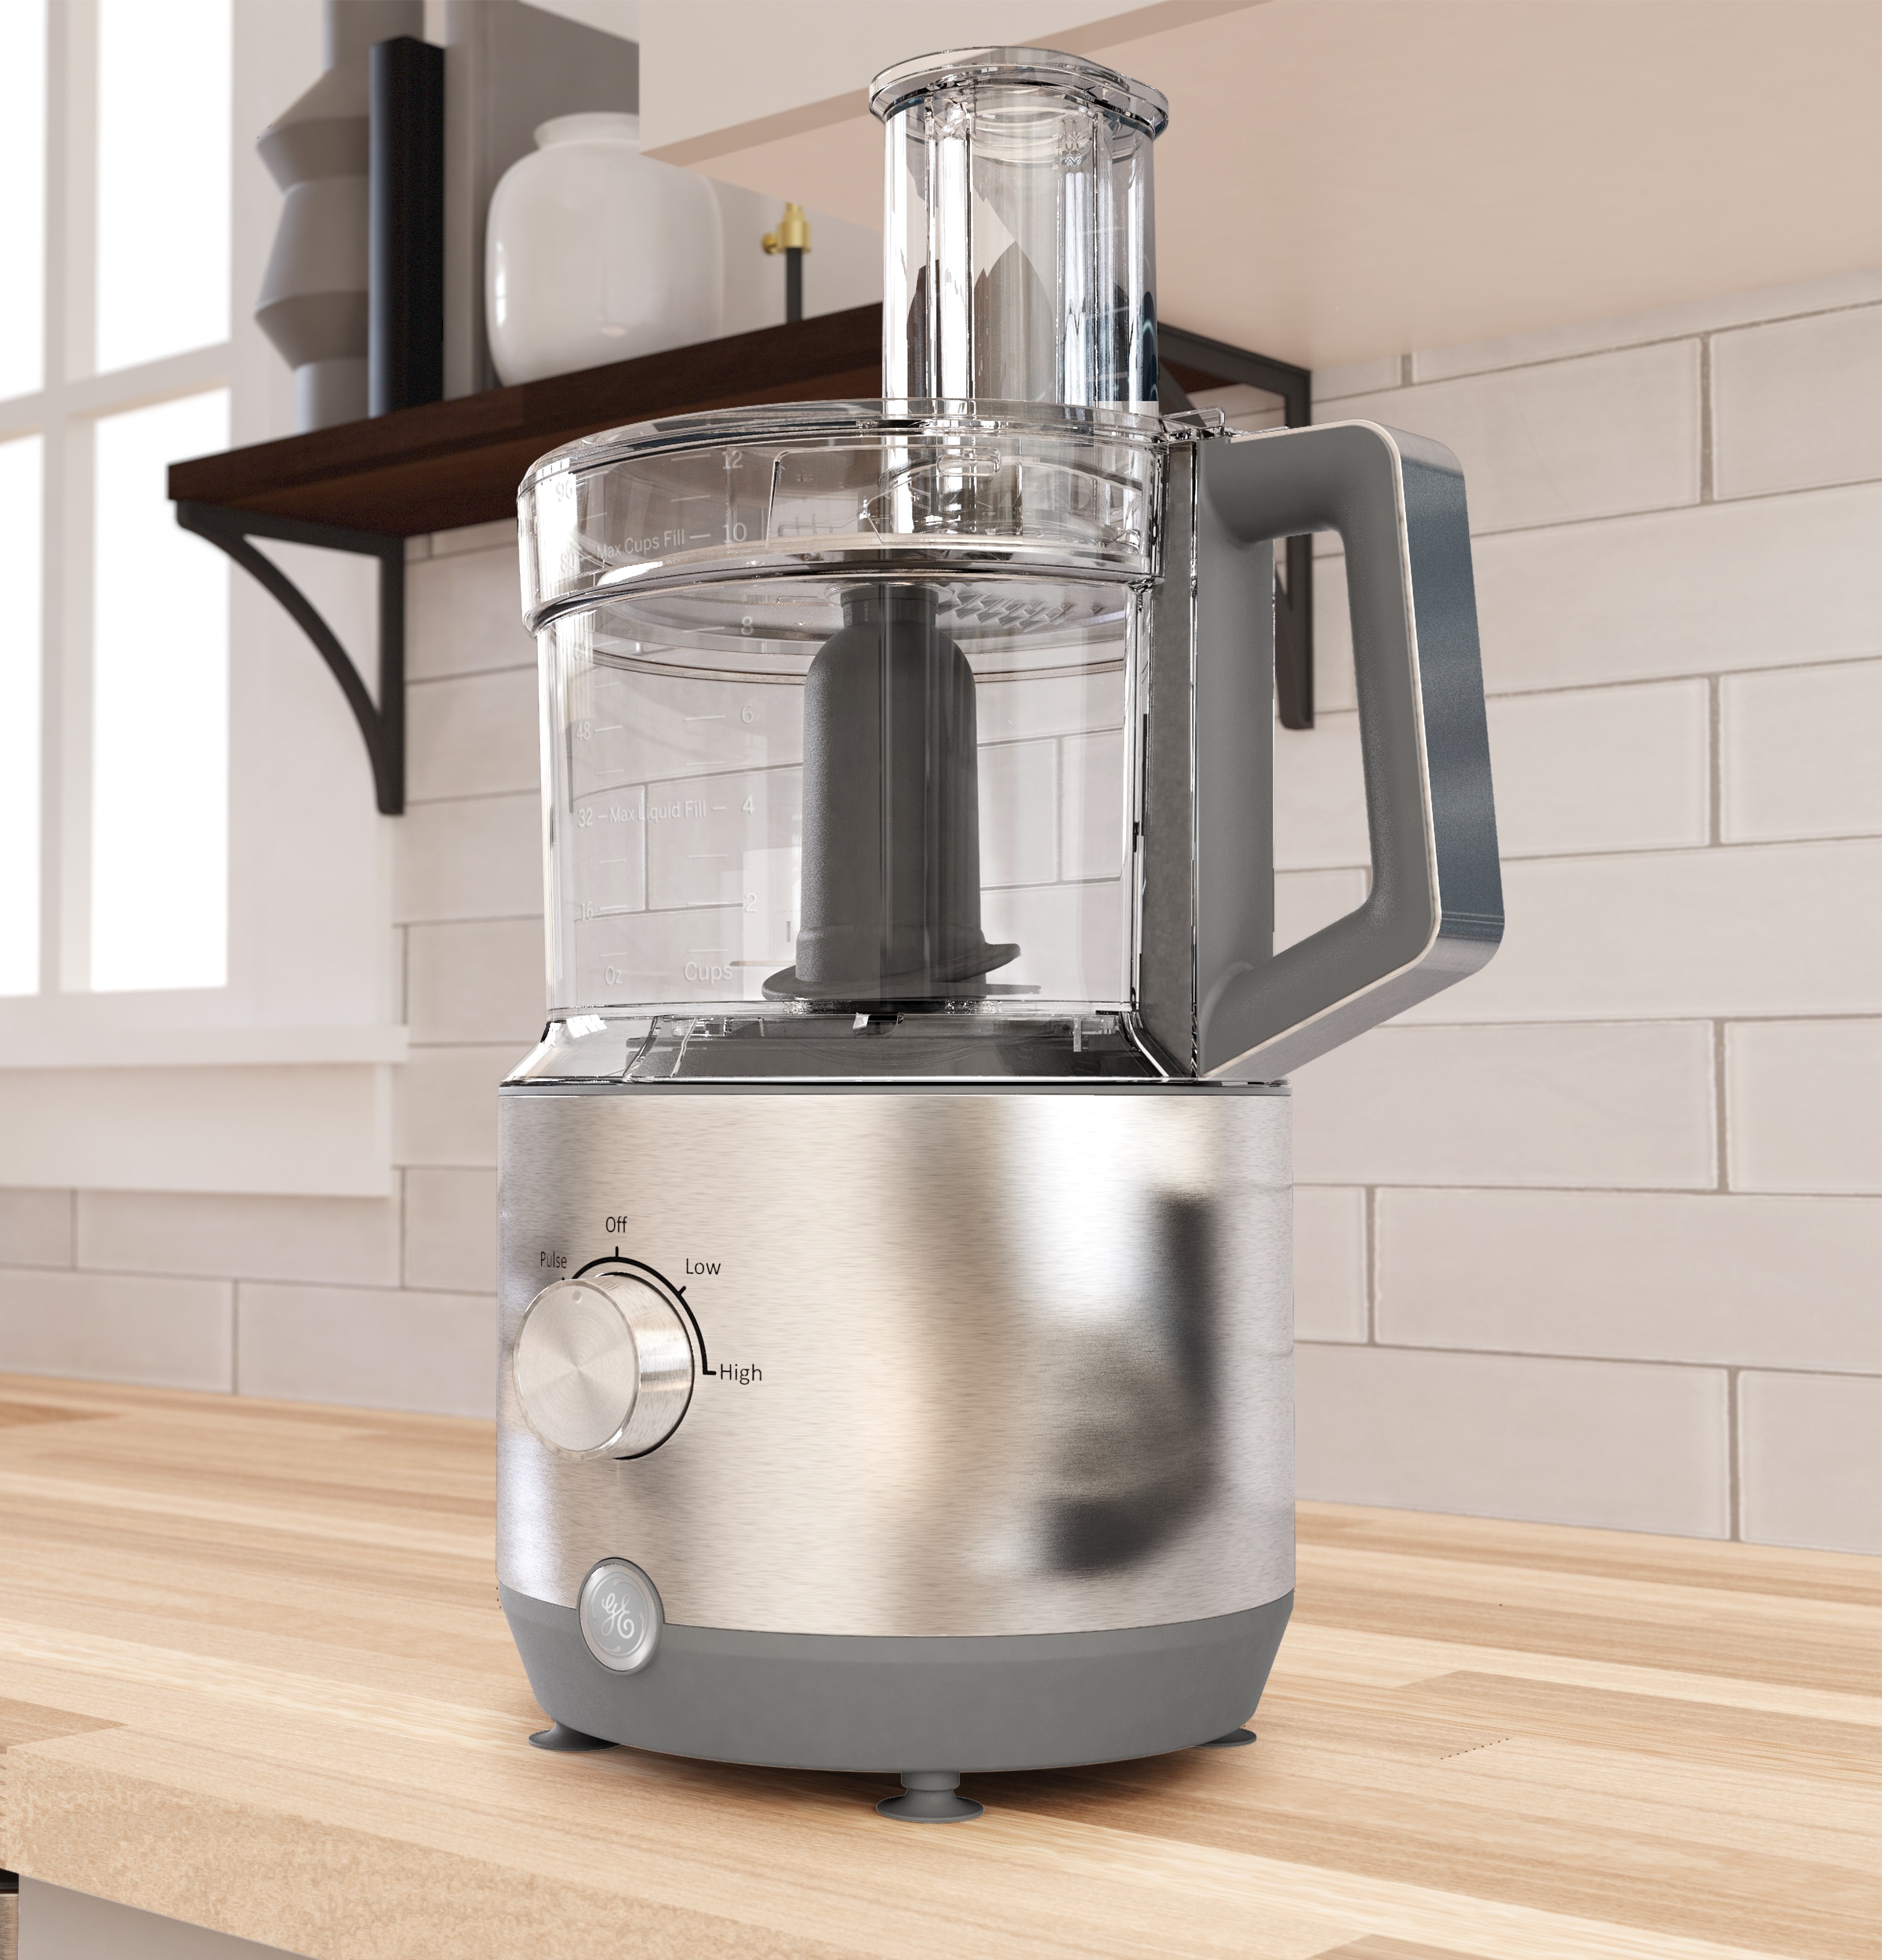 GE Food Processor - Works - Will not be shipped 